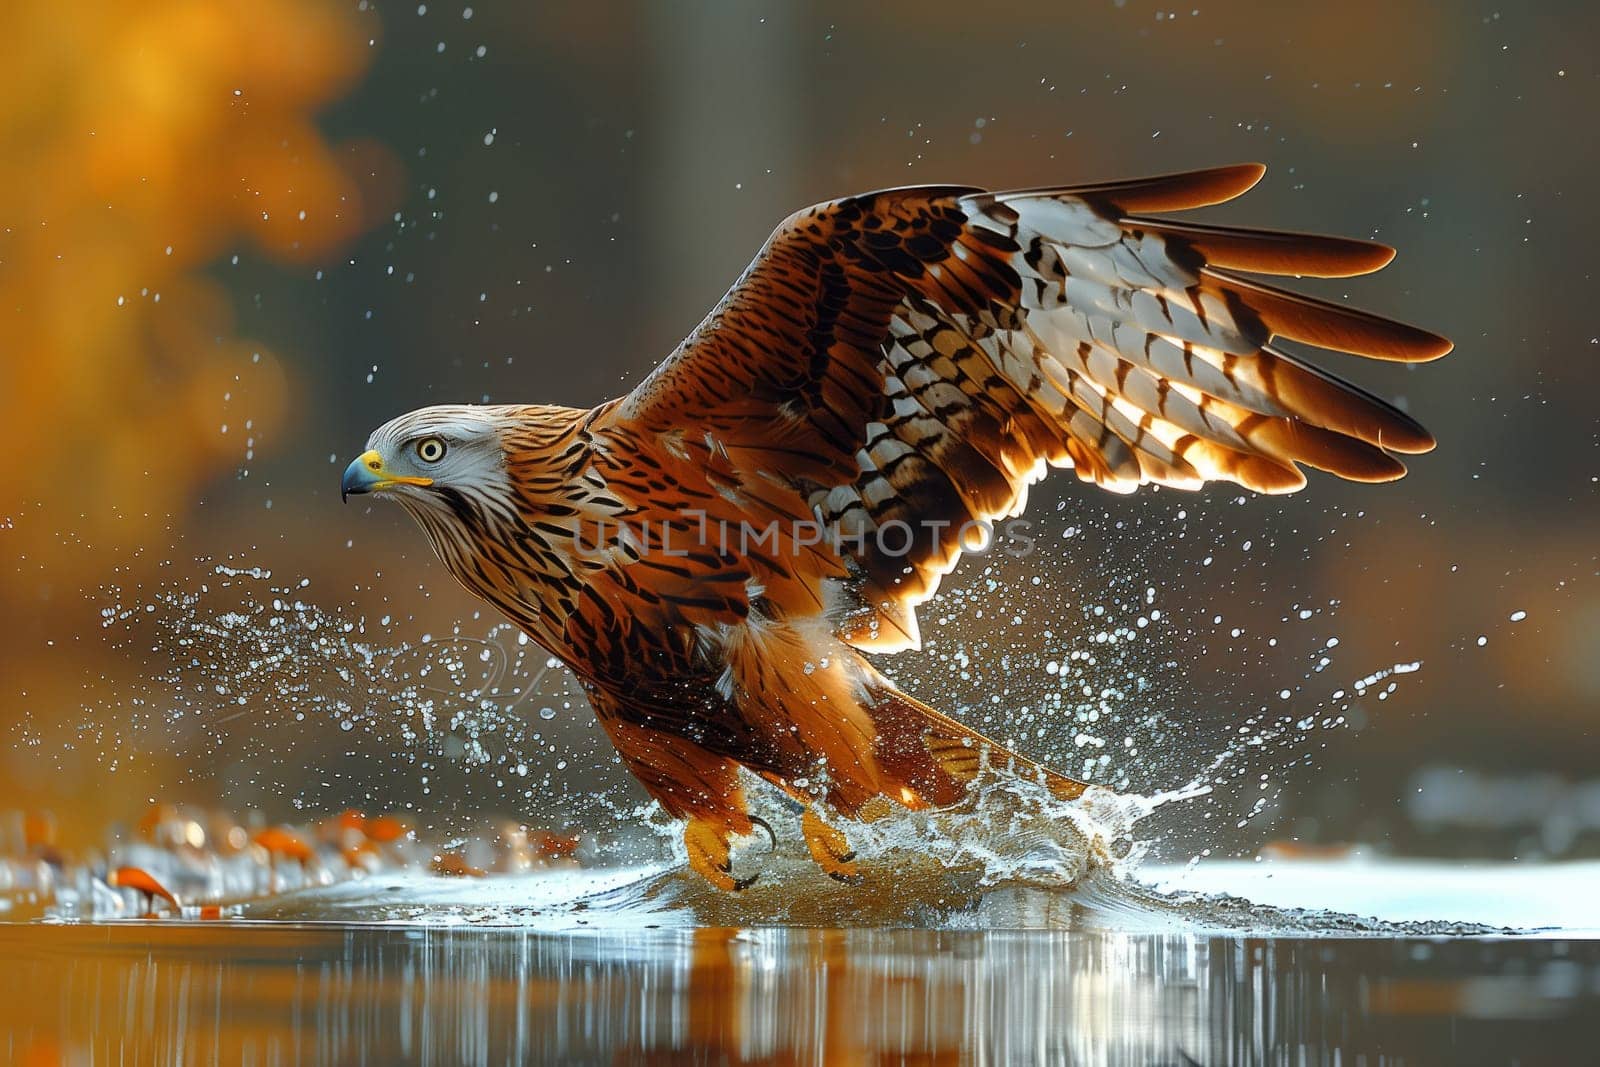 A majestic Accipitridae bird gracefully soars over the shimmering liquid surface of a tranquil body of water, showcasing the beauty of nature and its fluid inhabitants